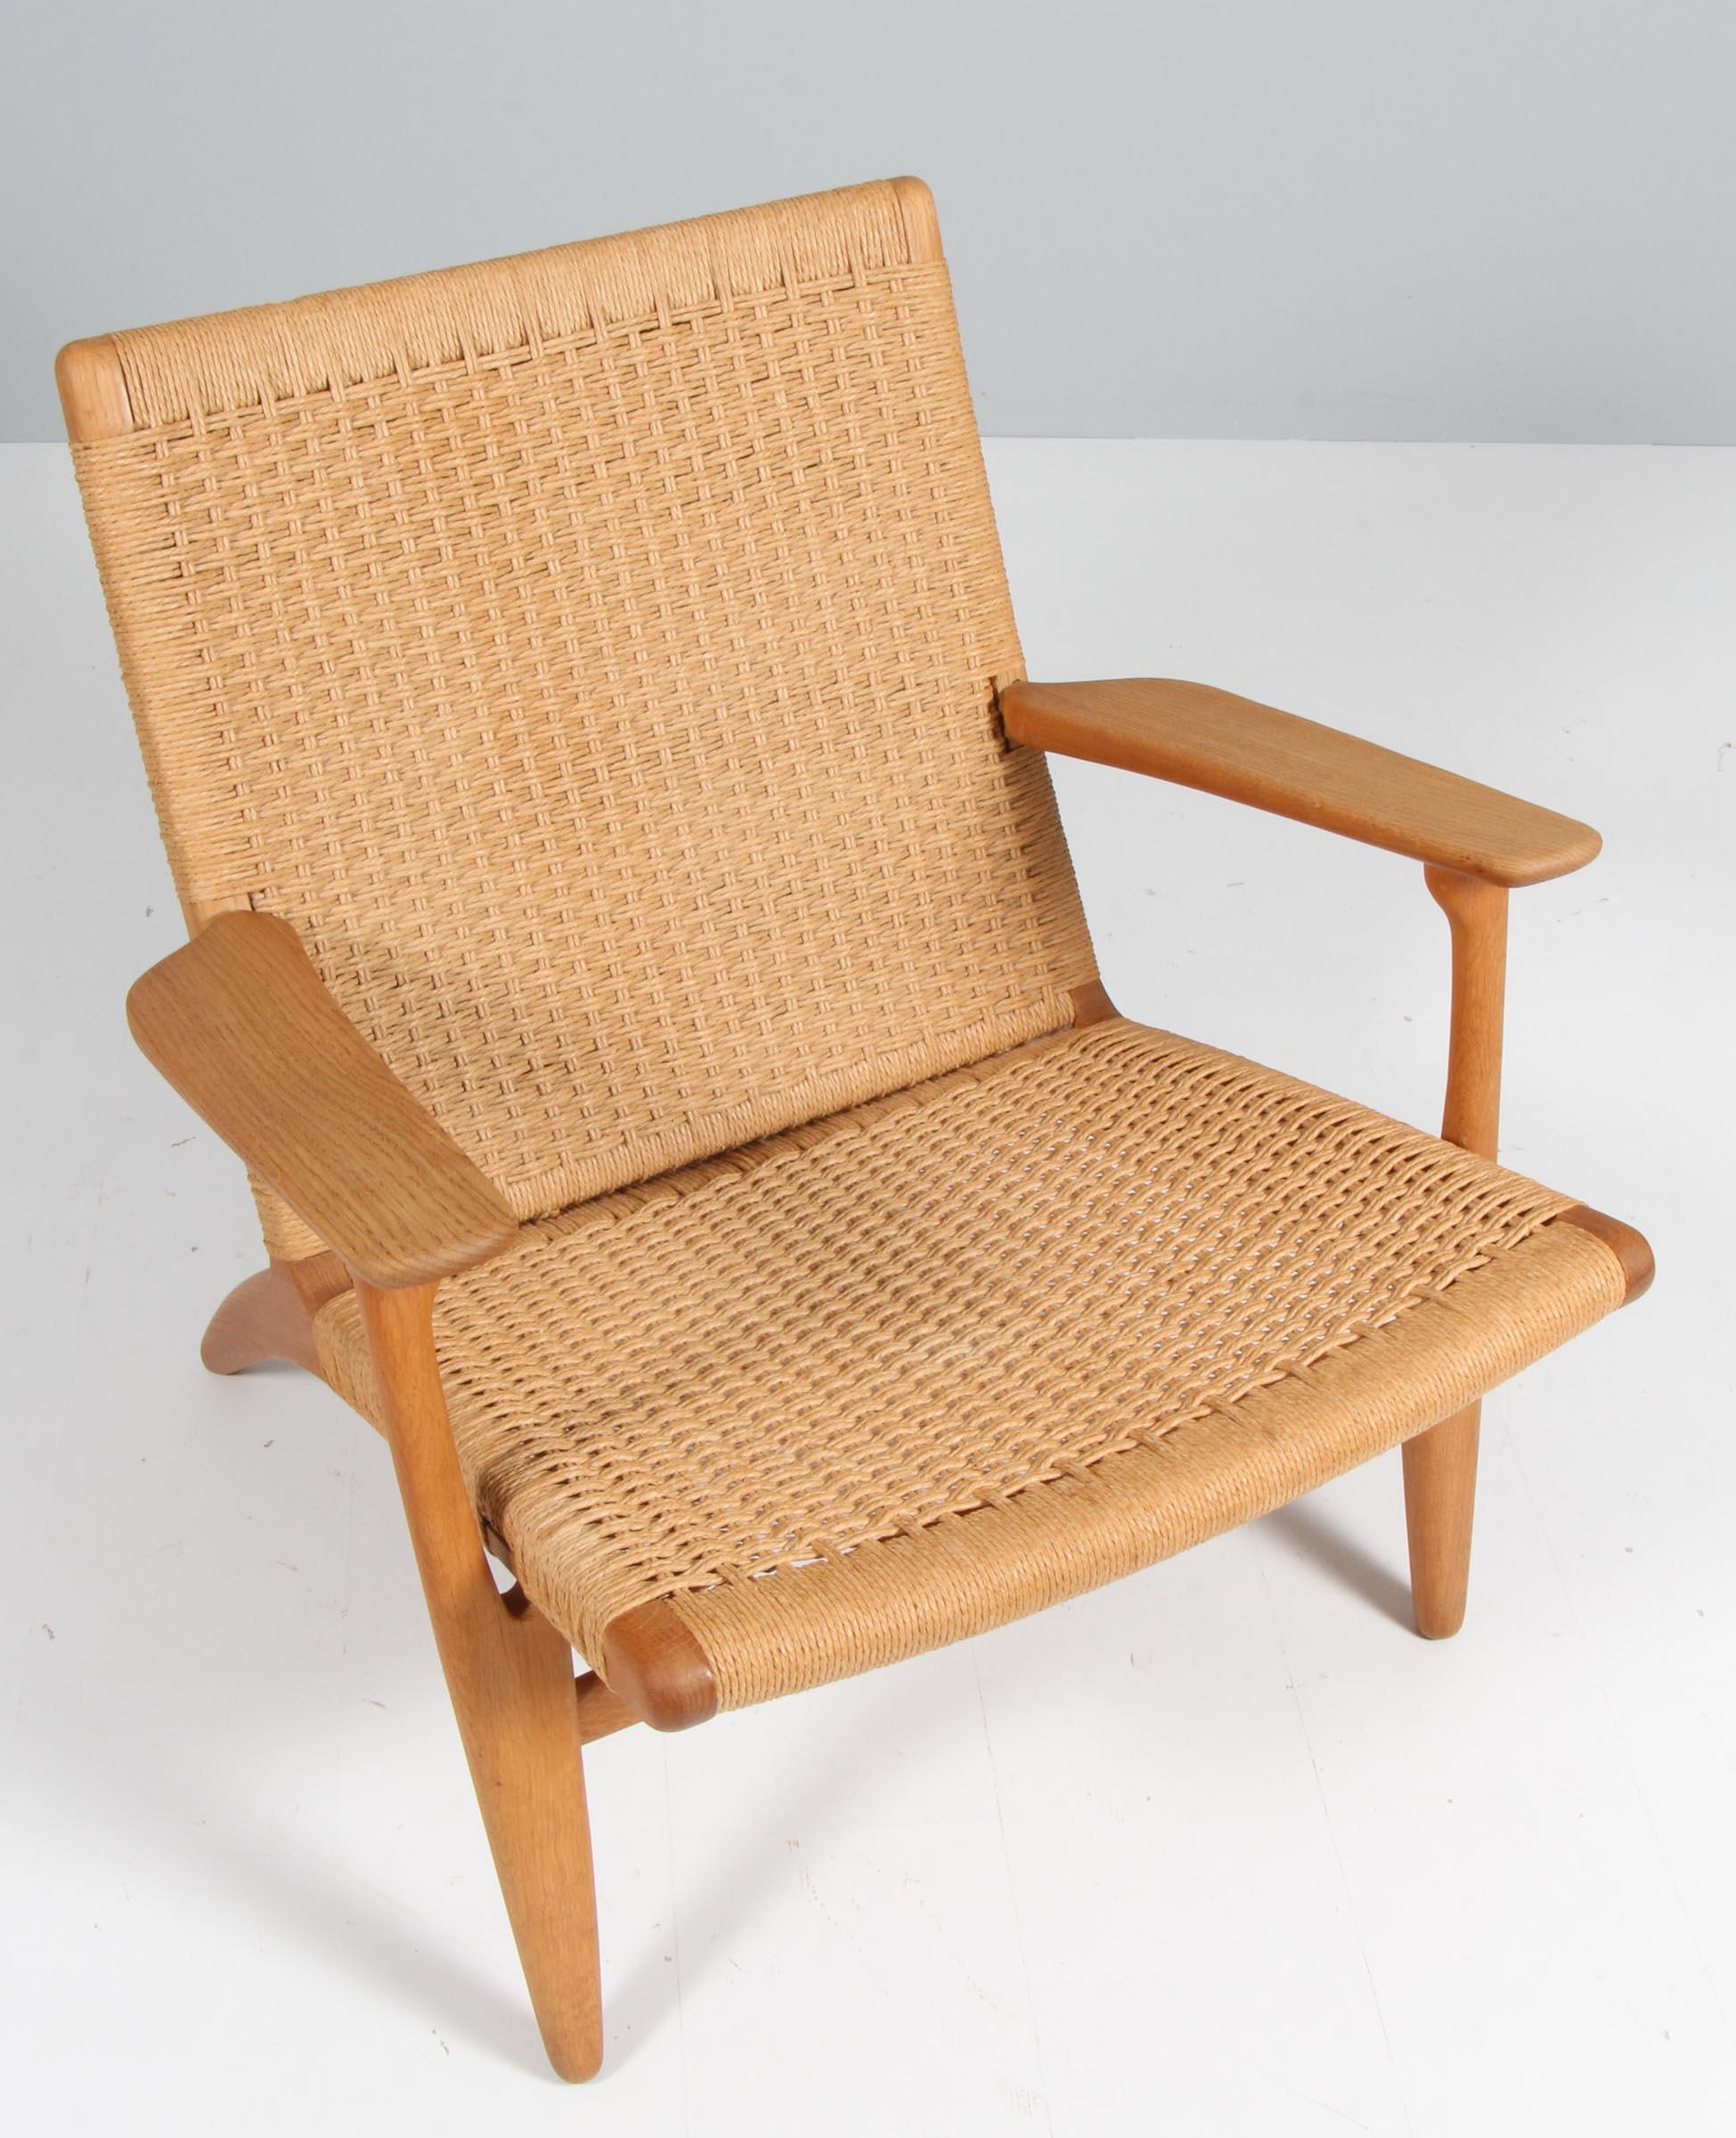 Hans J. Wegner

CH-25 lounge chair, 1950

Produced by Carl Hansen & Son, Copenhagen, Denmark. Oiled, patinated oak frame with original paper cord.
This is an early example of this iconic design in fantastic condition.